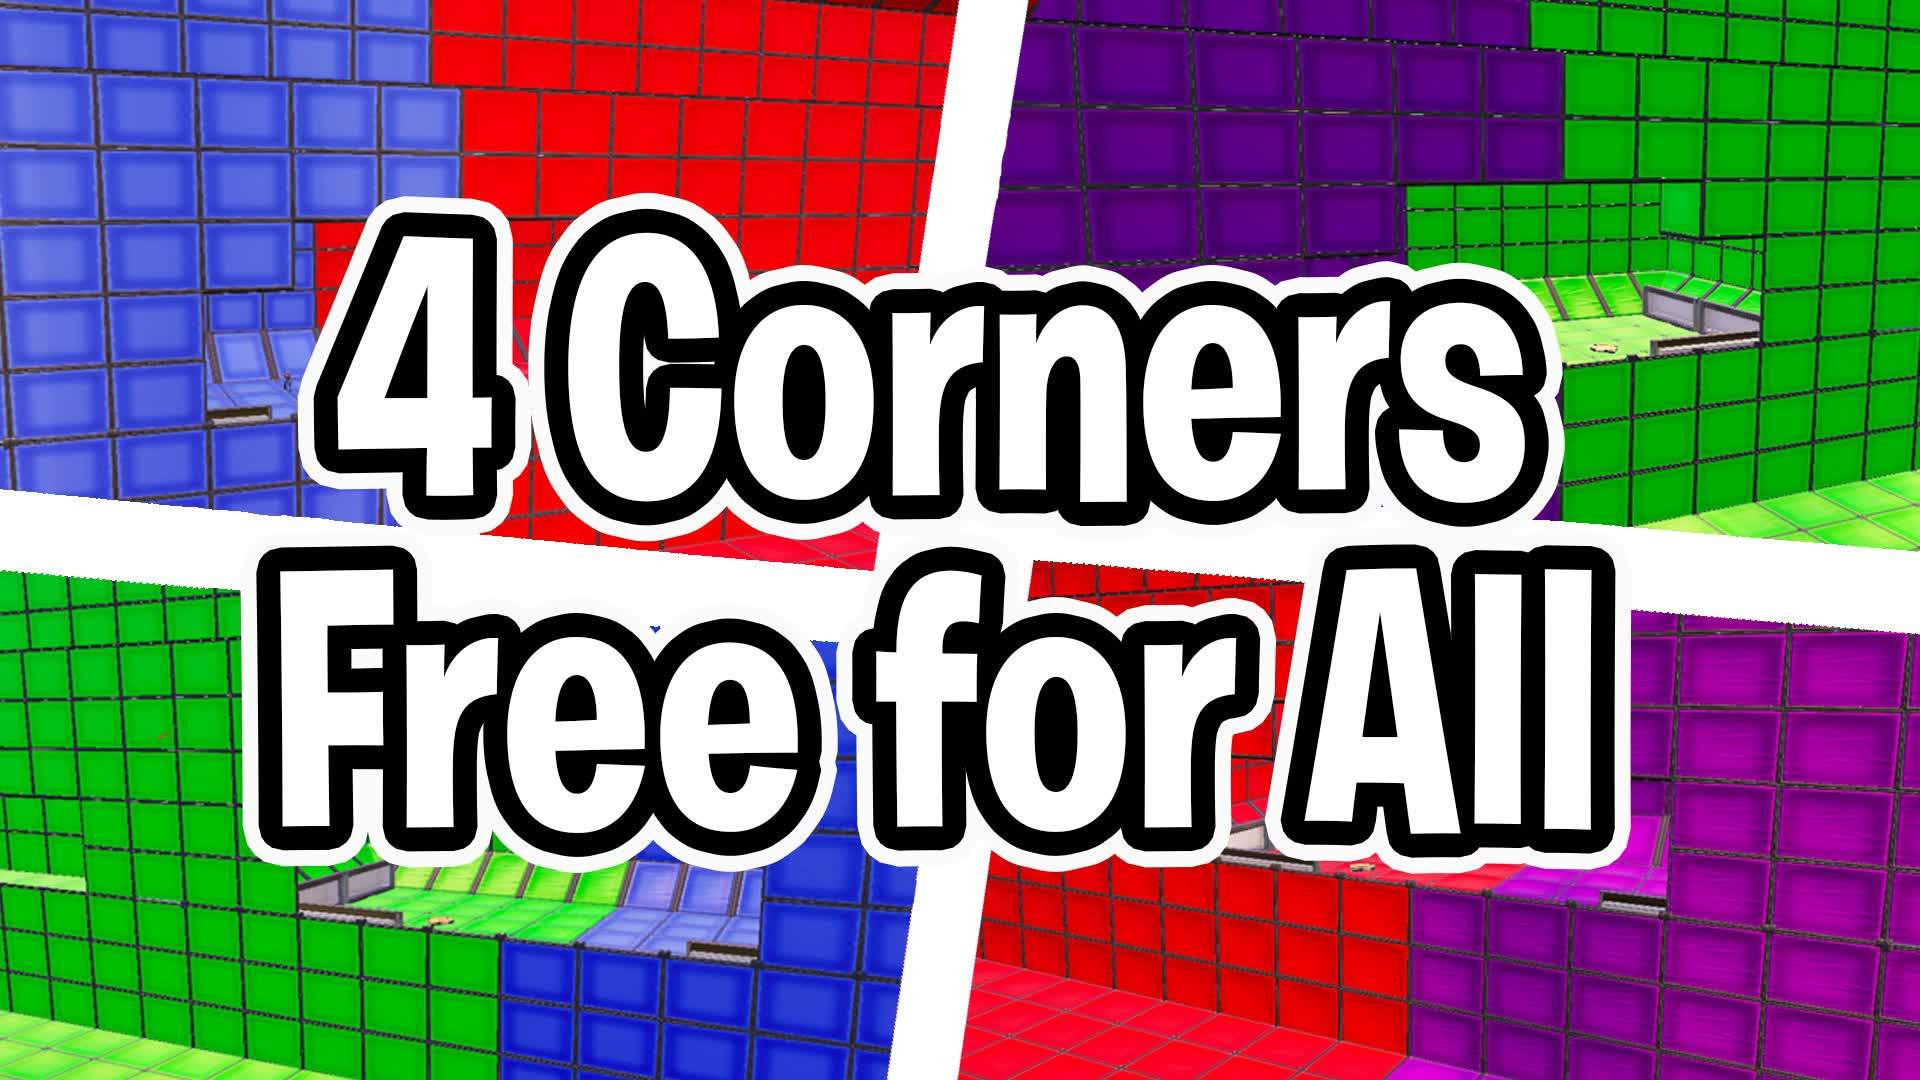 4 Corners FREE_FOR_ALL